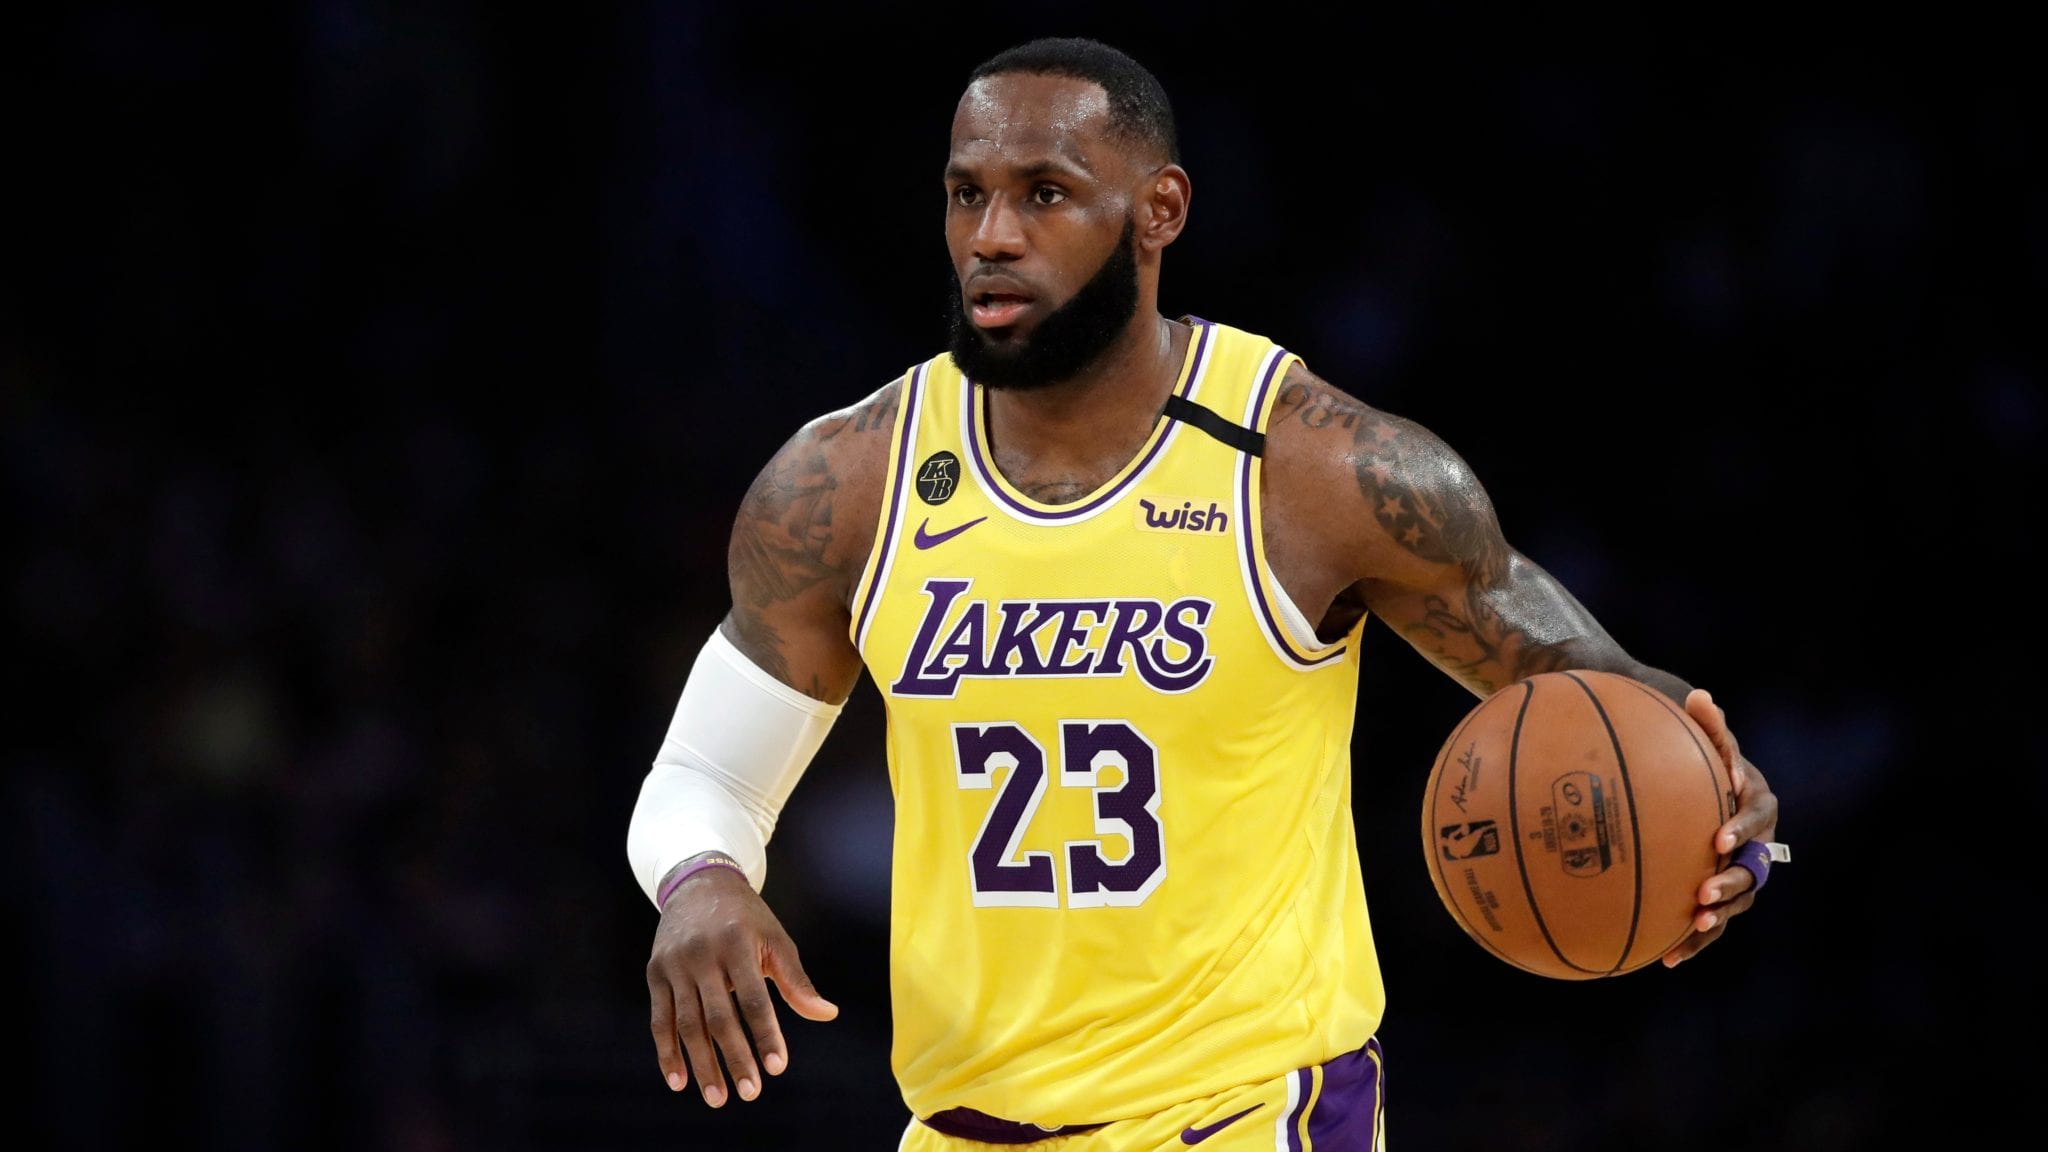 LeBron James To Pass $1 Billion In Career Earnings This Year